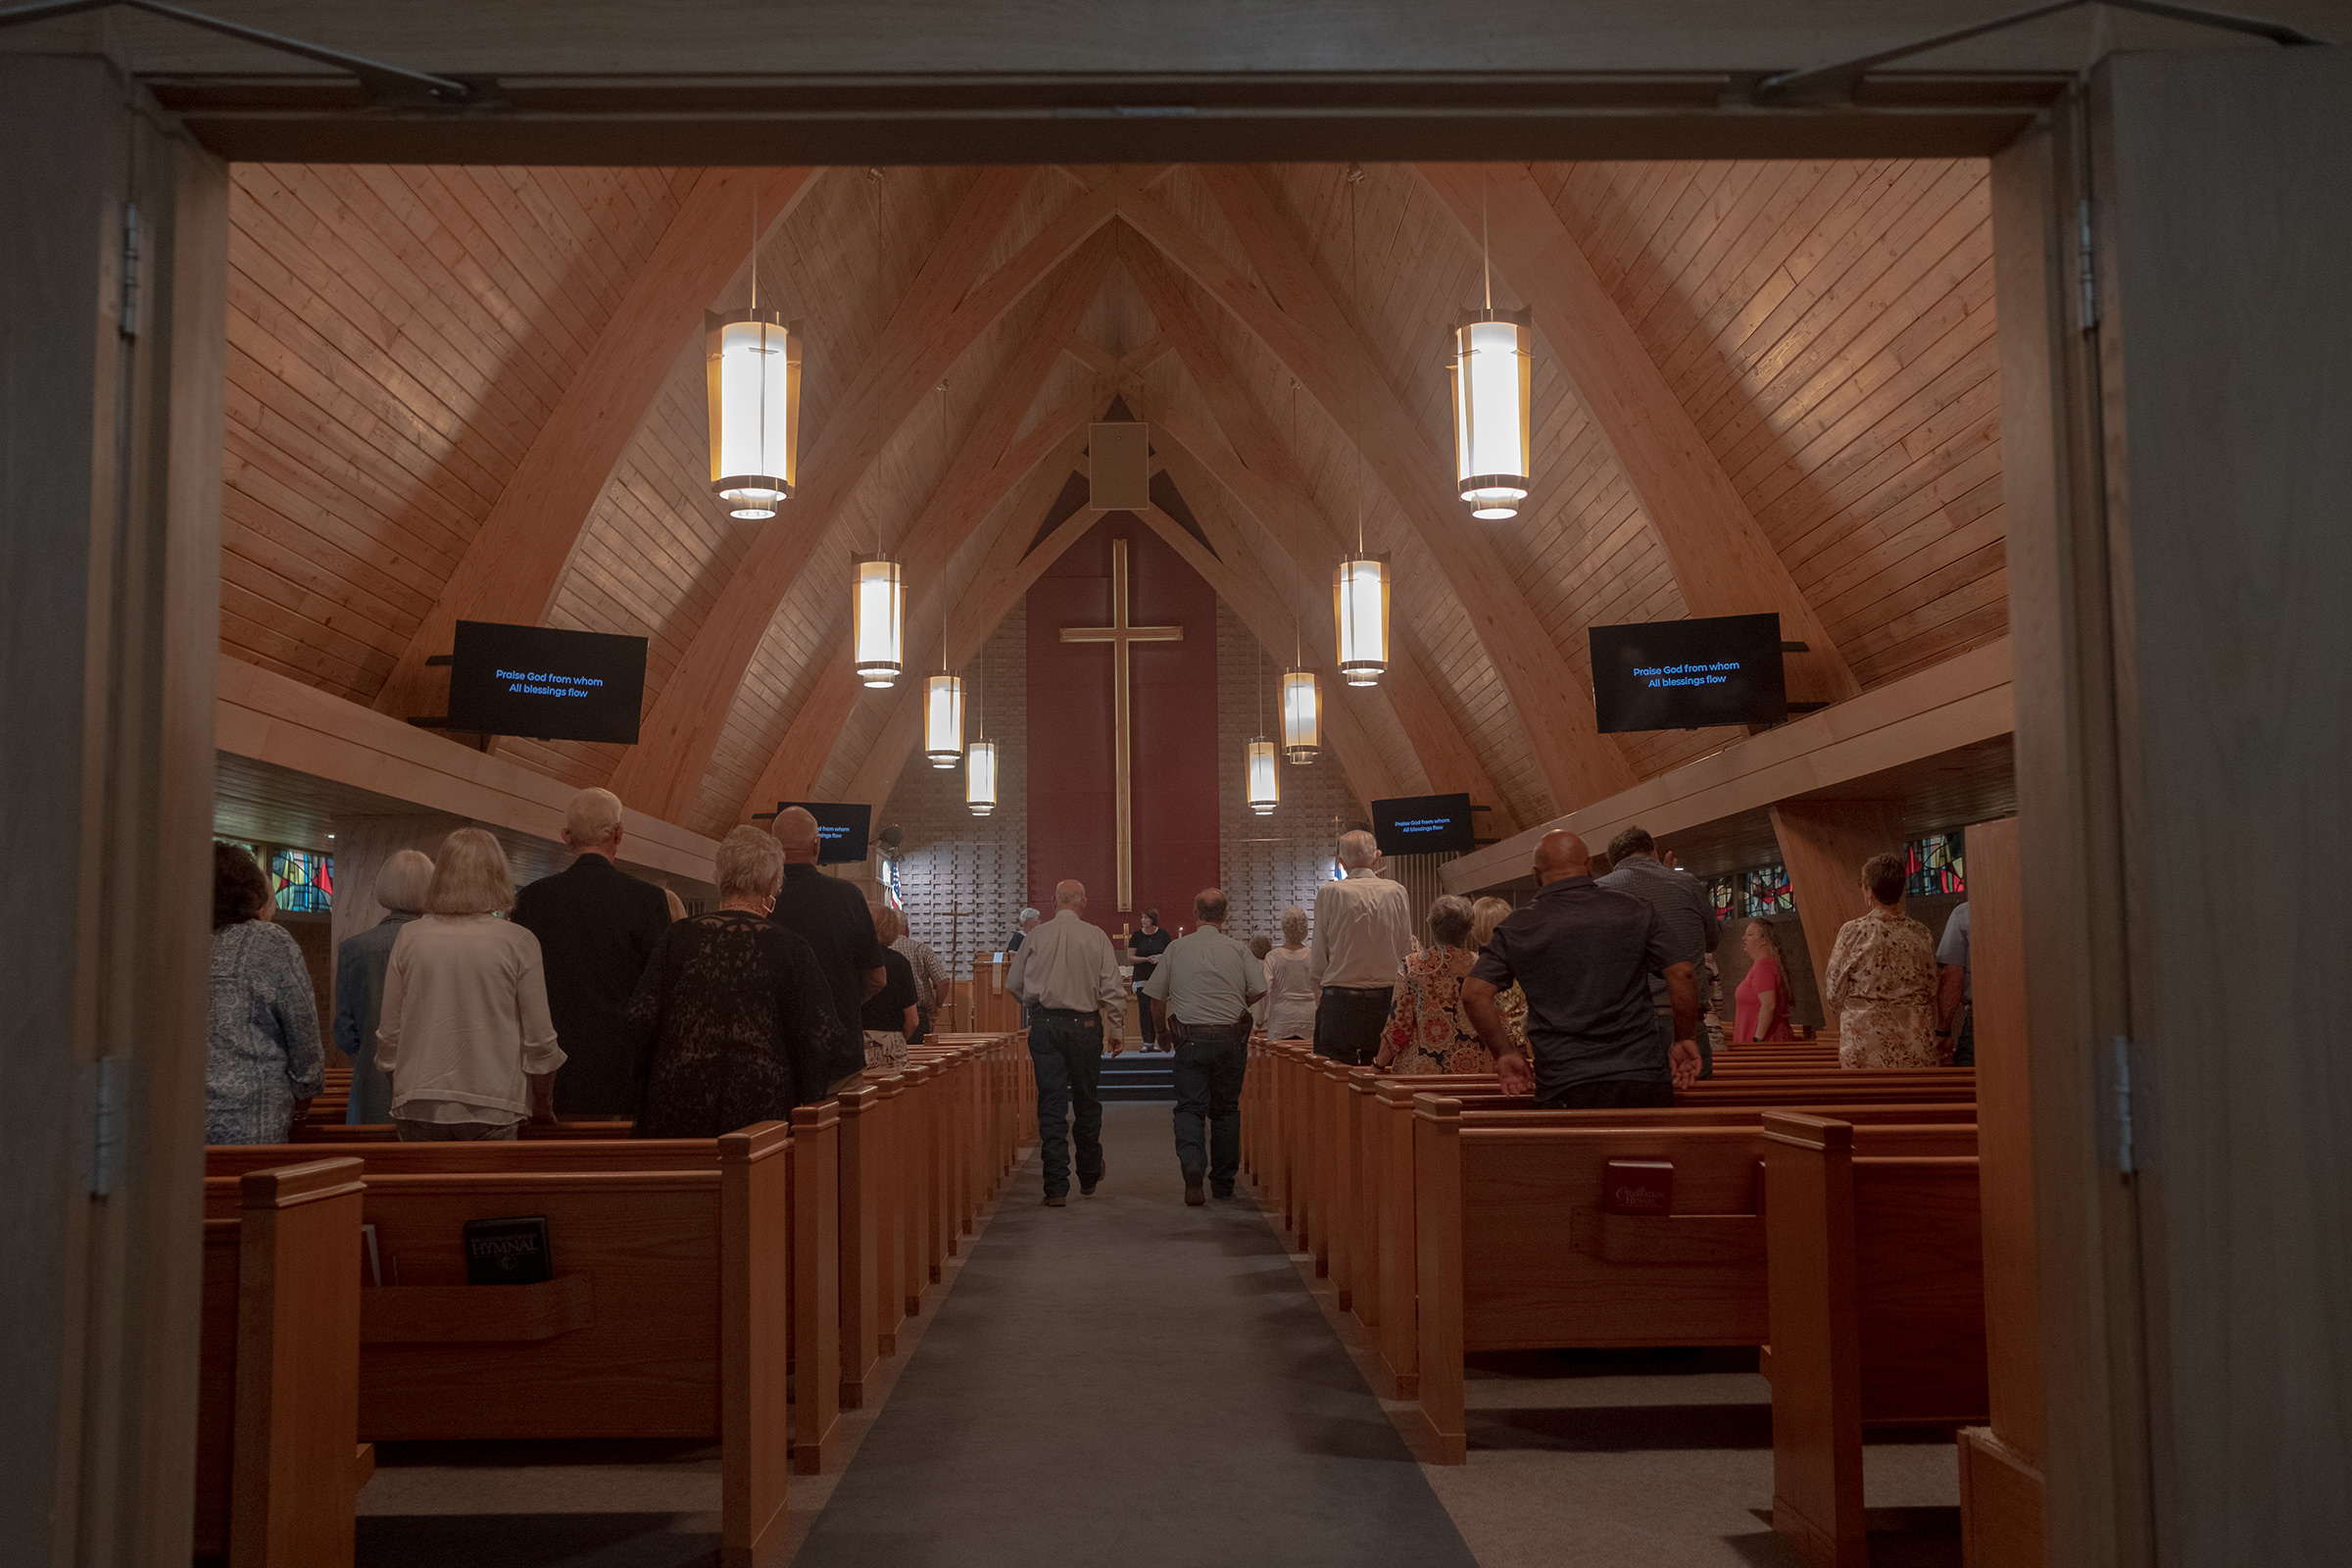 Some people are concerned about how politics and church have become intertwined in these towns. "It’s unsettling to me the way the Christian faith got almost married to the Republican party," says Mike Bryant, a former pastor in Lamb County. "As a follower of Jesus our first relationship is to Jesus, not a party." (September Dawn Bottoms for TIME)